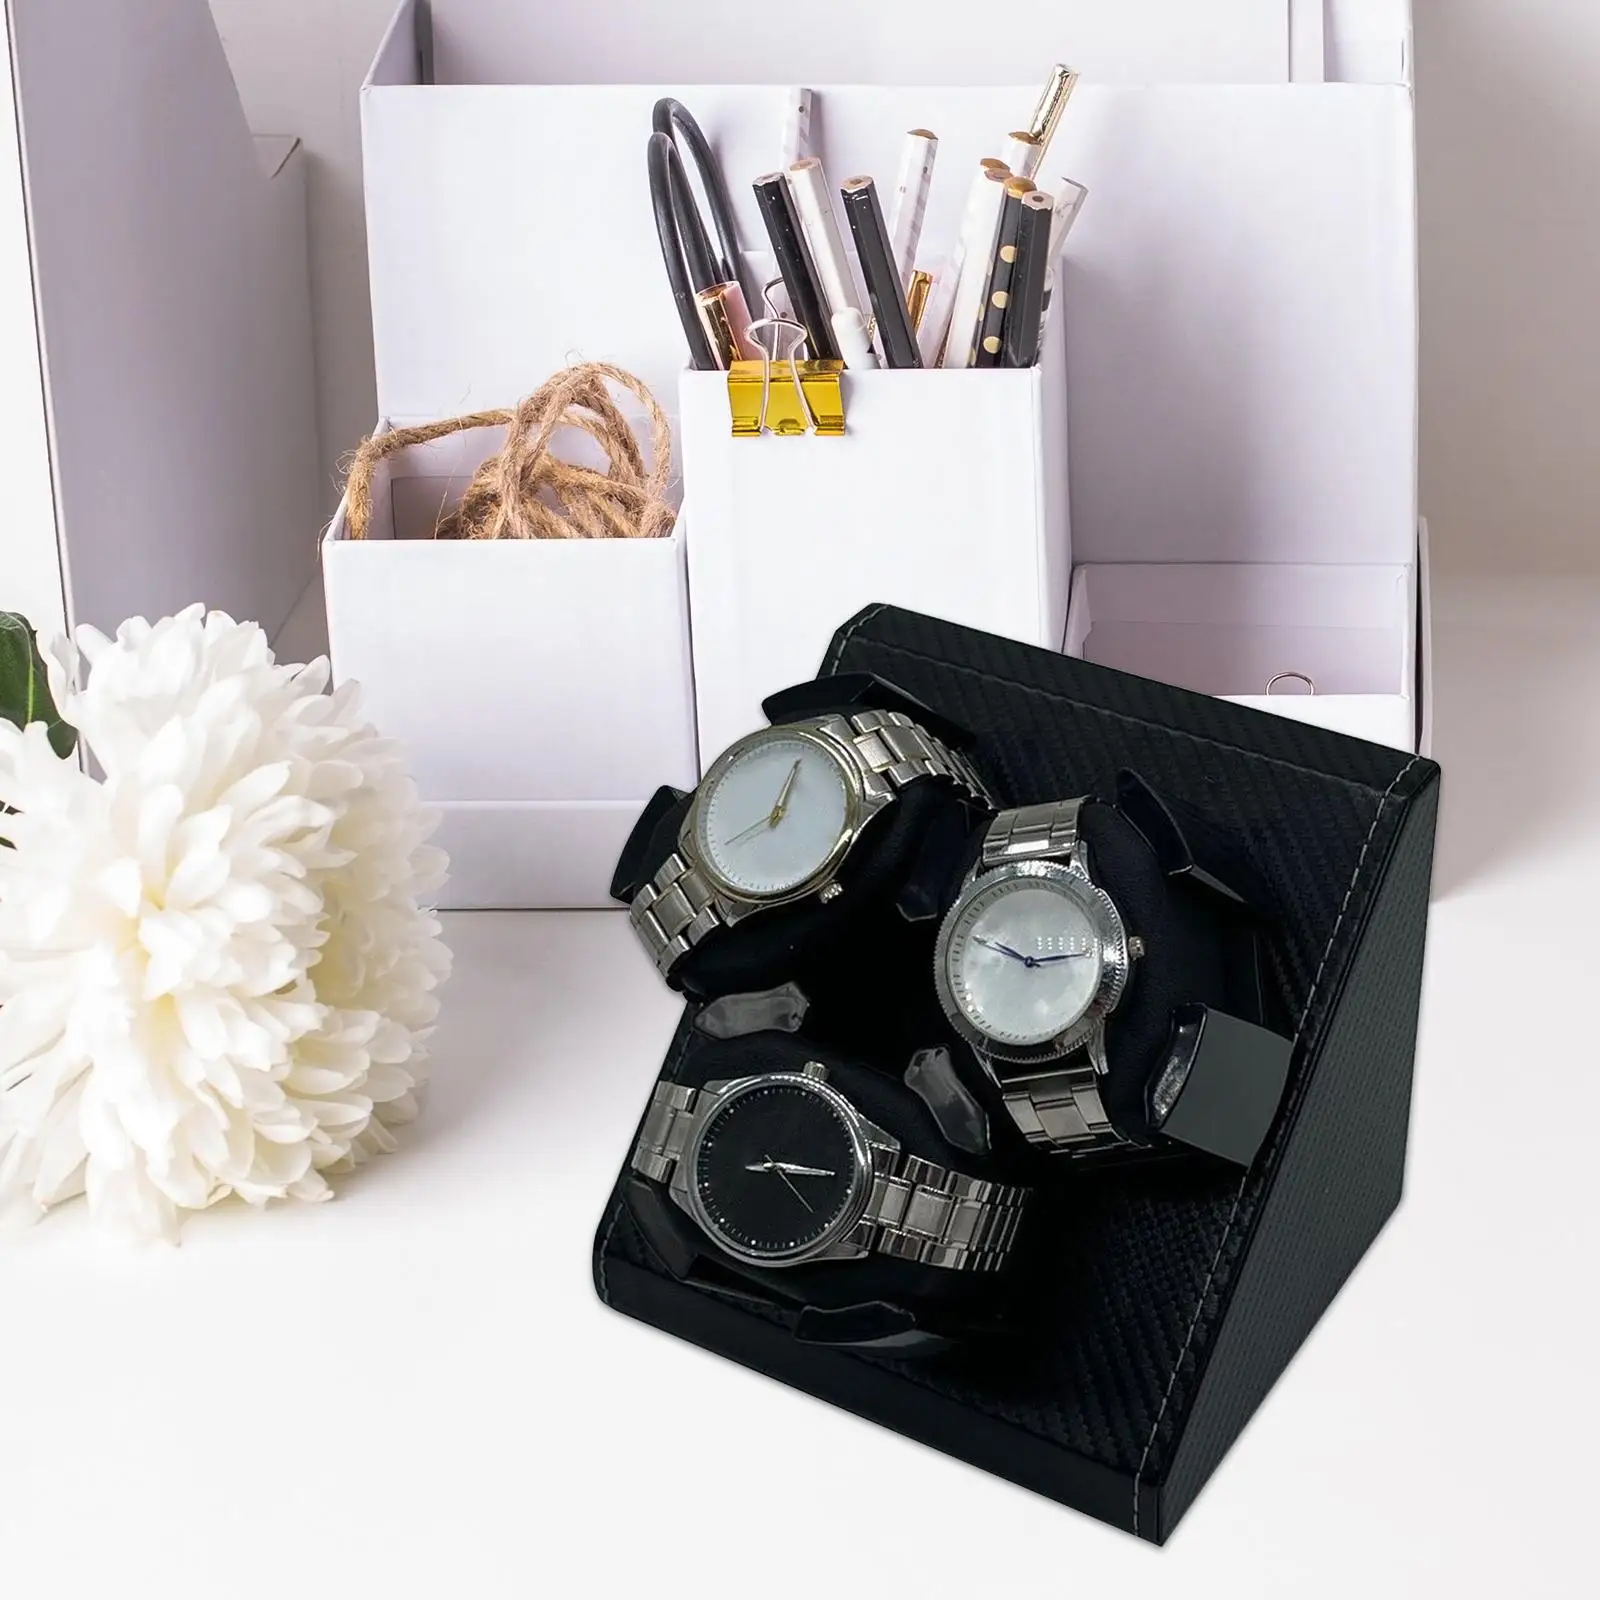 Automatic Watch Winder Watch Display Box 2 Rotation Mode USB Jewelry Storage 3 Watch Winder for Gifts Desktop Mechanical Watches